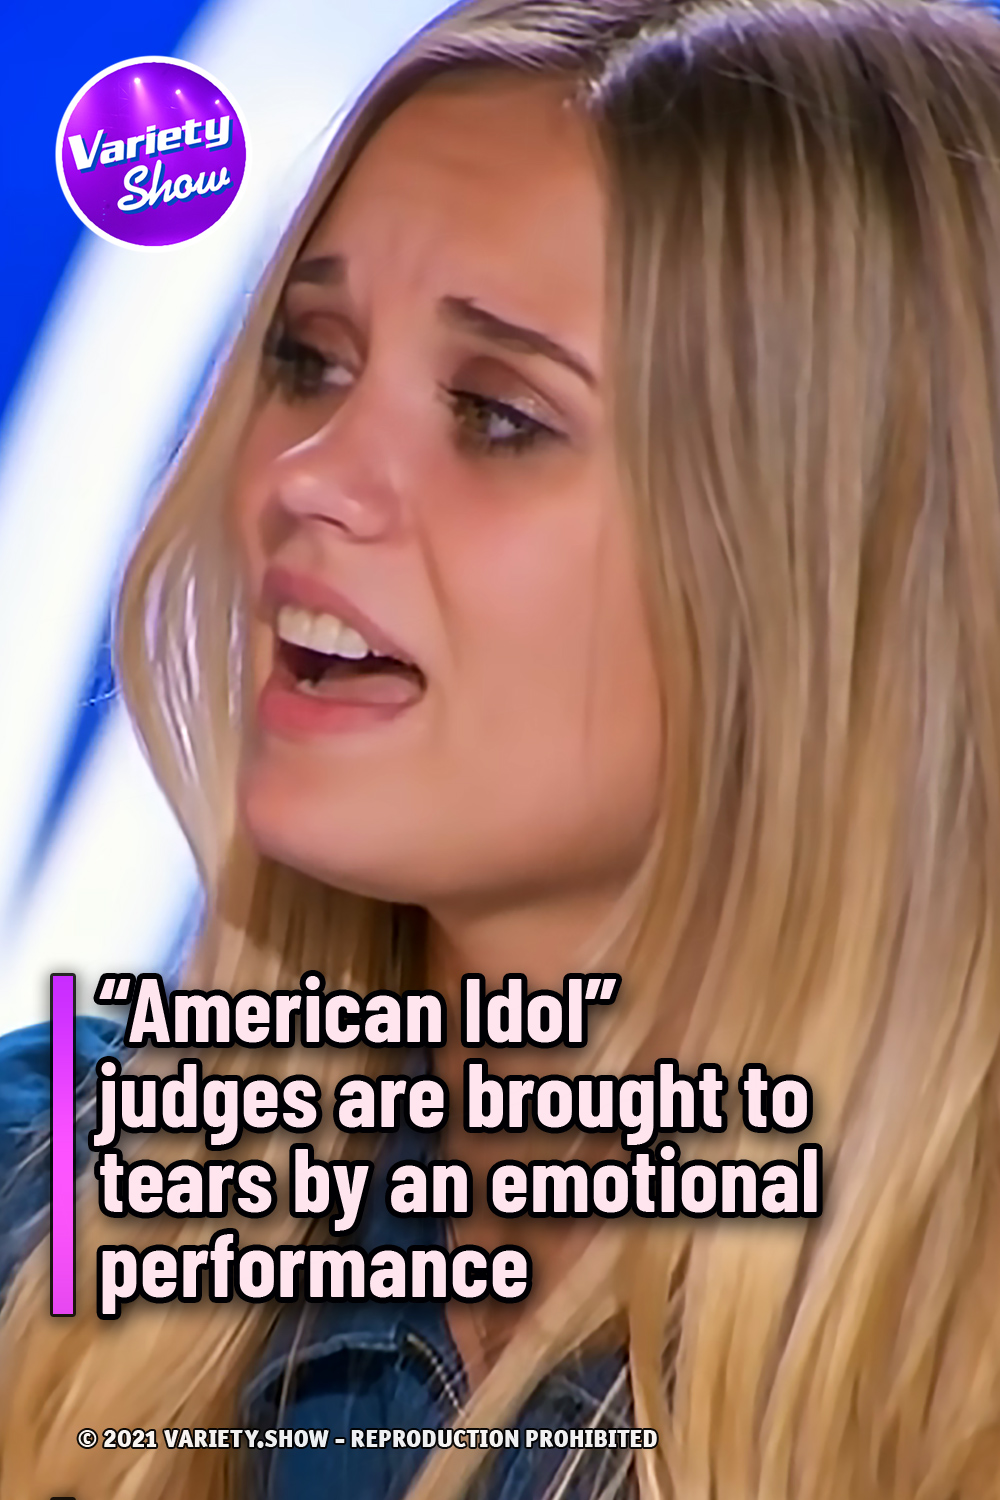 “American Idol” judges are brought to tears by an emotional performance